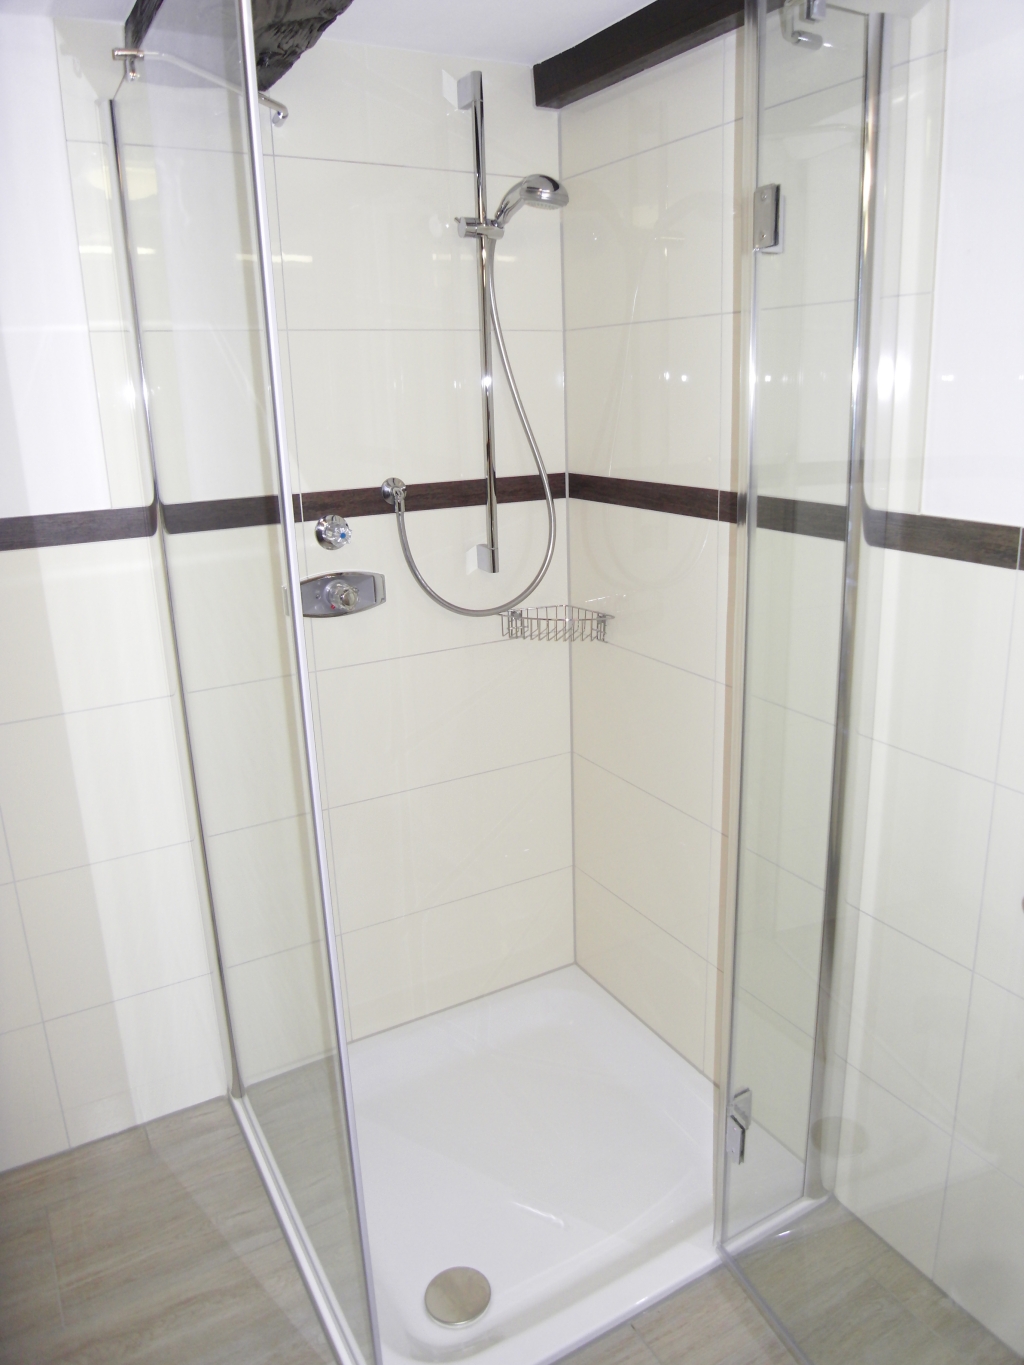 Image of the shower